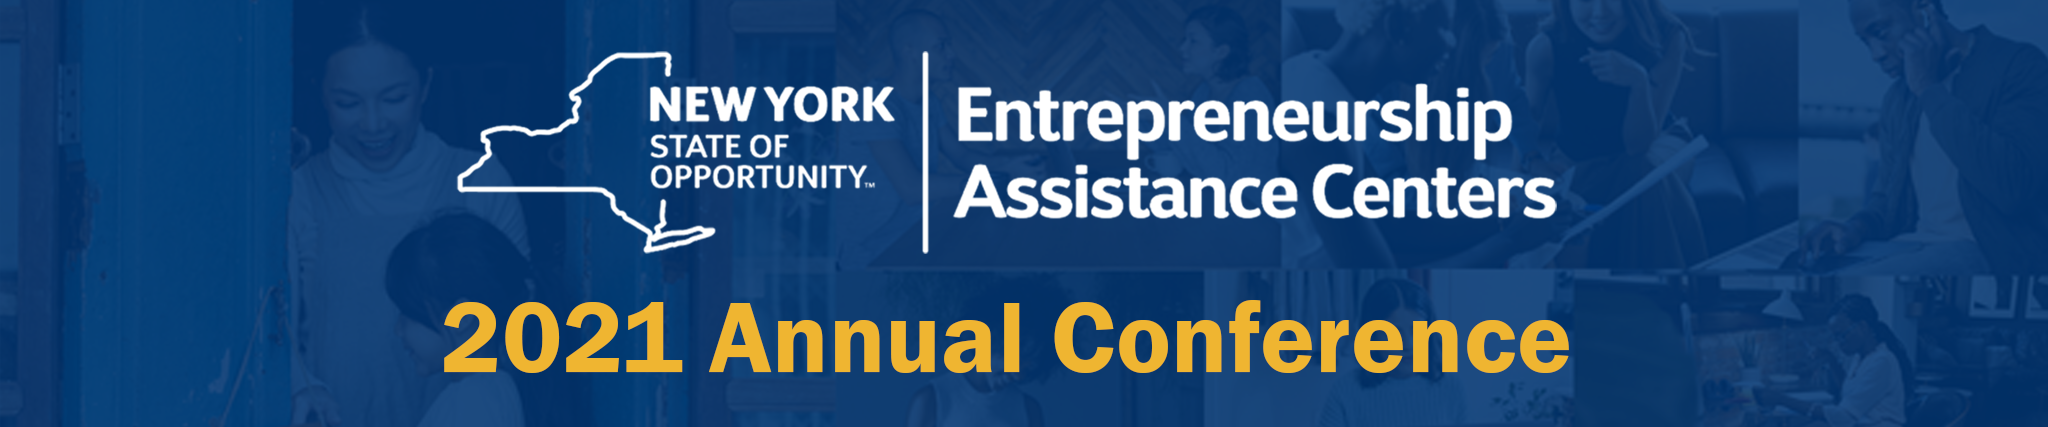 Banner for the 2021 Annual Conference of the Entrepreneurship Assistance Centers with the "New York State of Opportunity" logo to the left.